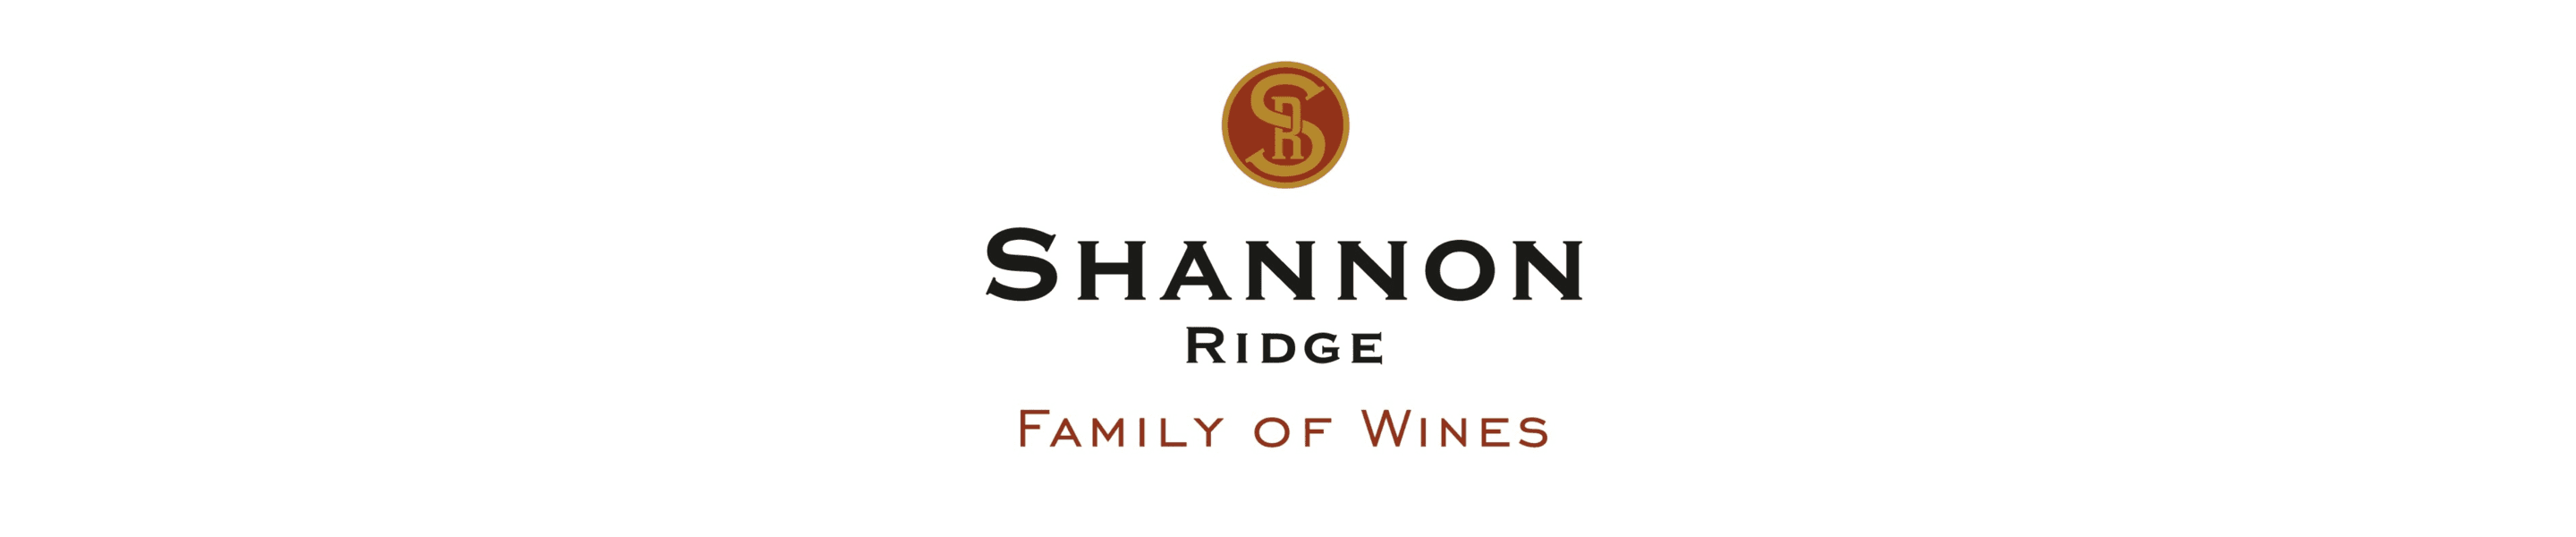 At Shannon Ridge we are dedicated to creating a family of wines that consumers love at top-quality and affordable prices. We are passionate about preserving our land, not only for great vineyard sites, but for the wild creatures which share our property. Our sustainability practices integrate a flock of sheep that clean the vineyards, remove the excess canopy, and reduce the need for chemicals, while providing natural fertilizer.